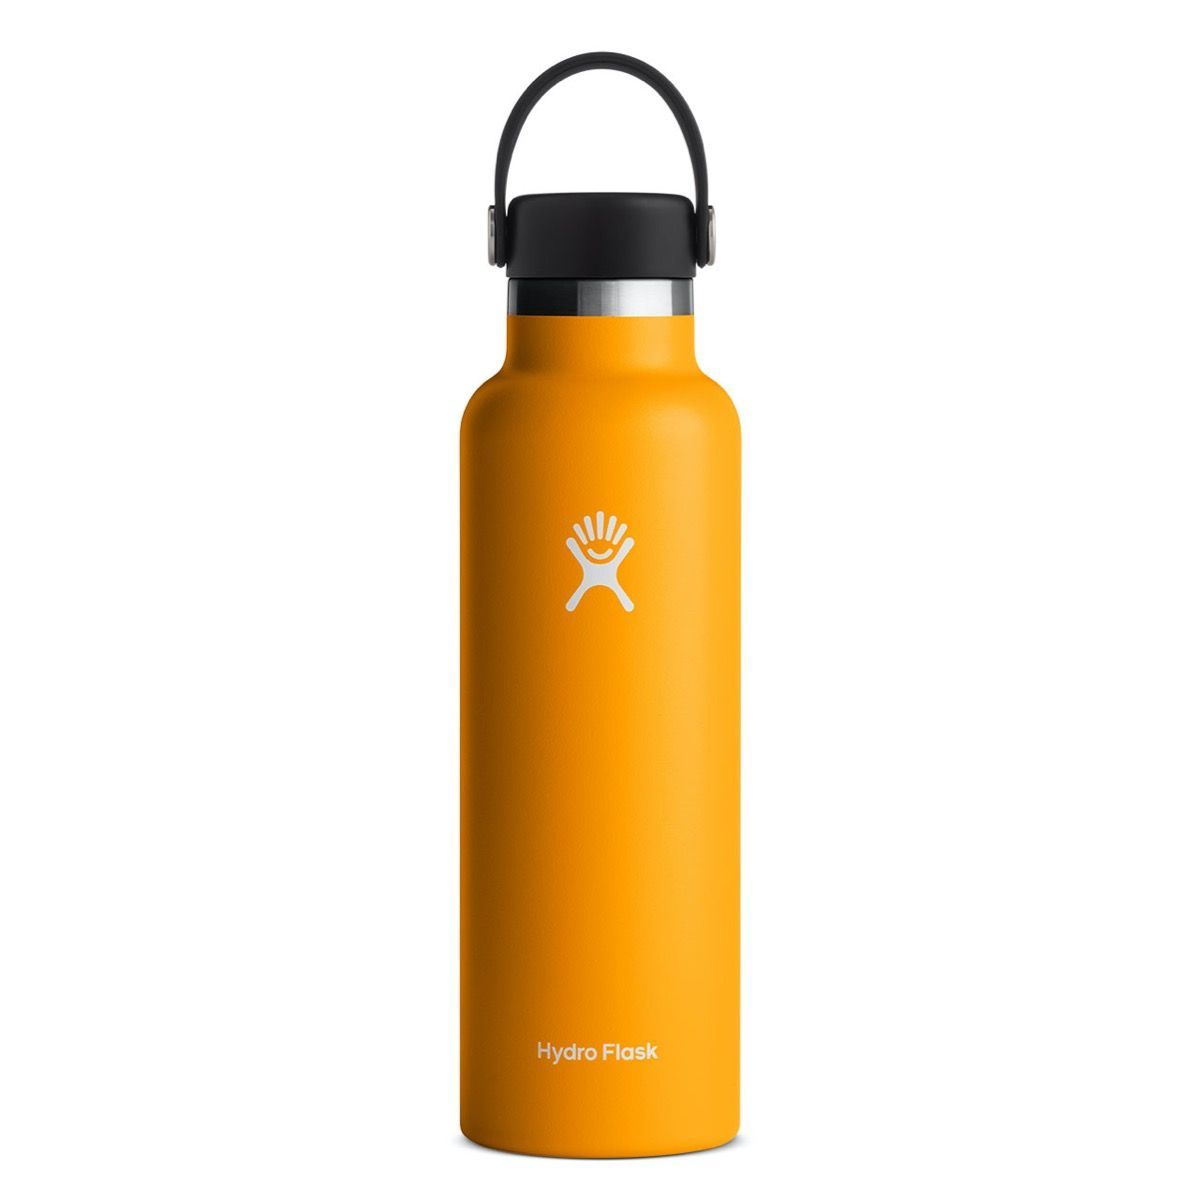 Hydro Flask Standard Mouth bottle 0.62l/21oz - Stainless Steel BPA Free Starfish Cutlery